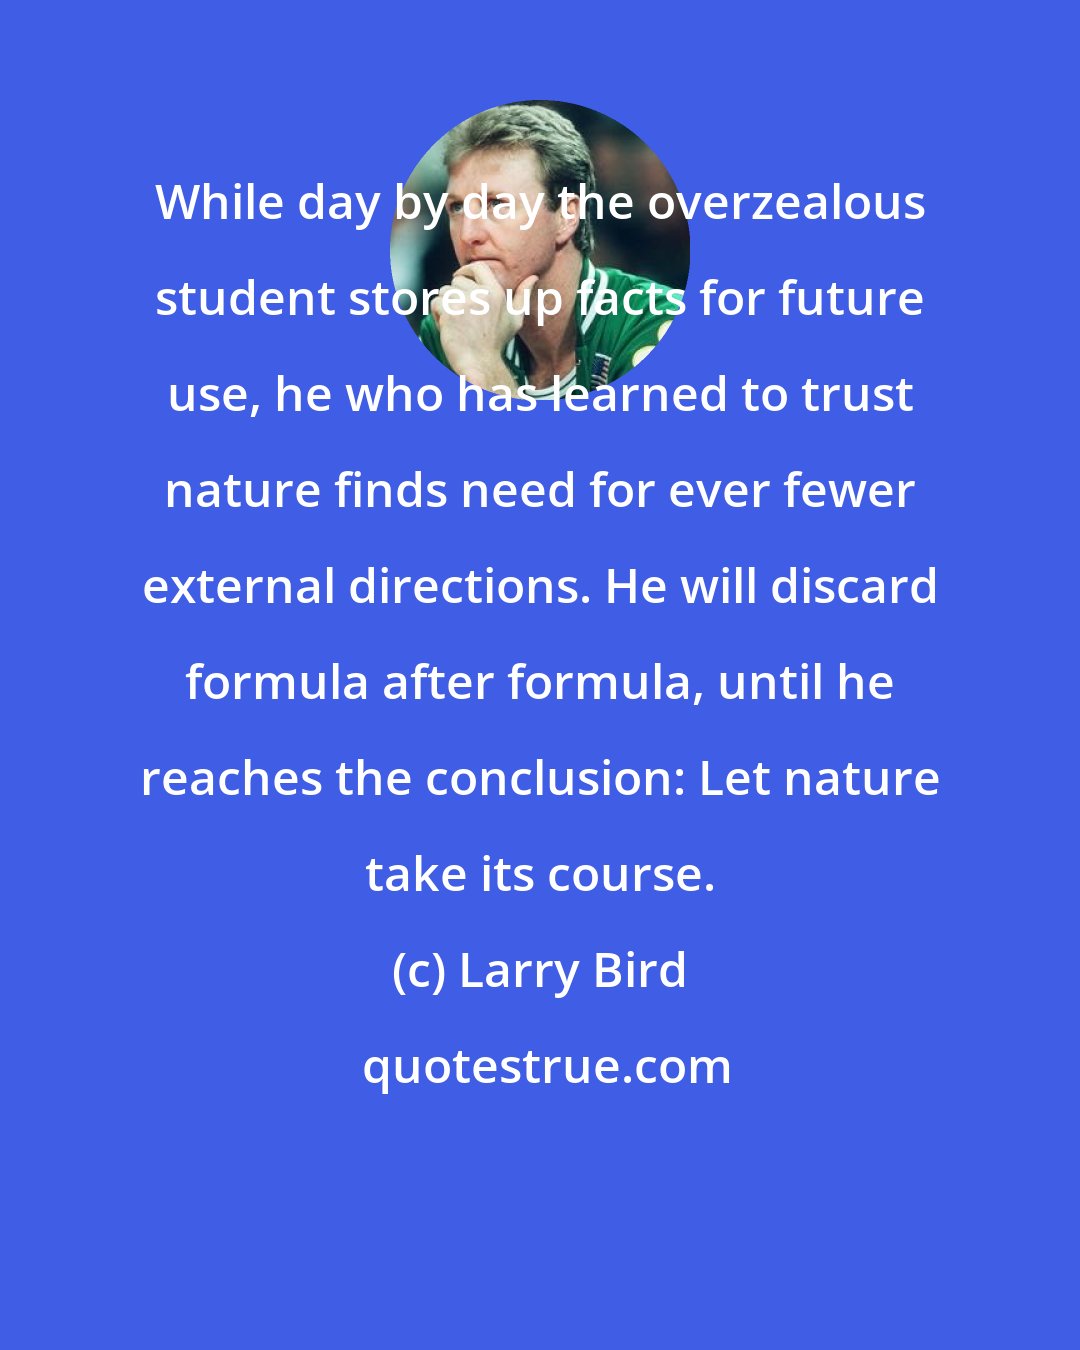 Larry Bird: While day by day the overzealous student stores up facts for future use, he who has learned to trust nature finds need for ever fewer external directions. He will discard formula after formula, until he reaches the conclusion: Let nature take its course.